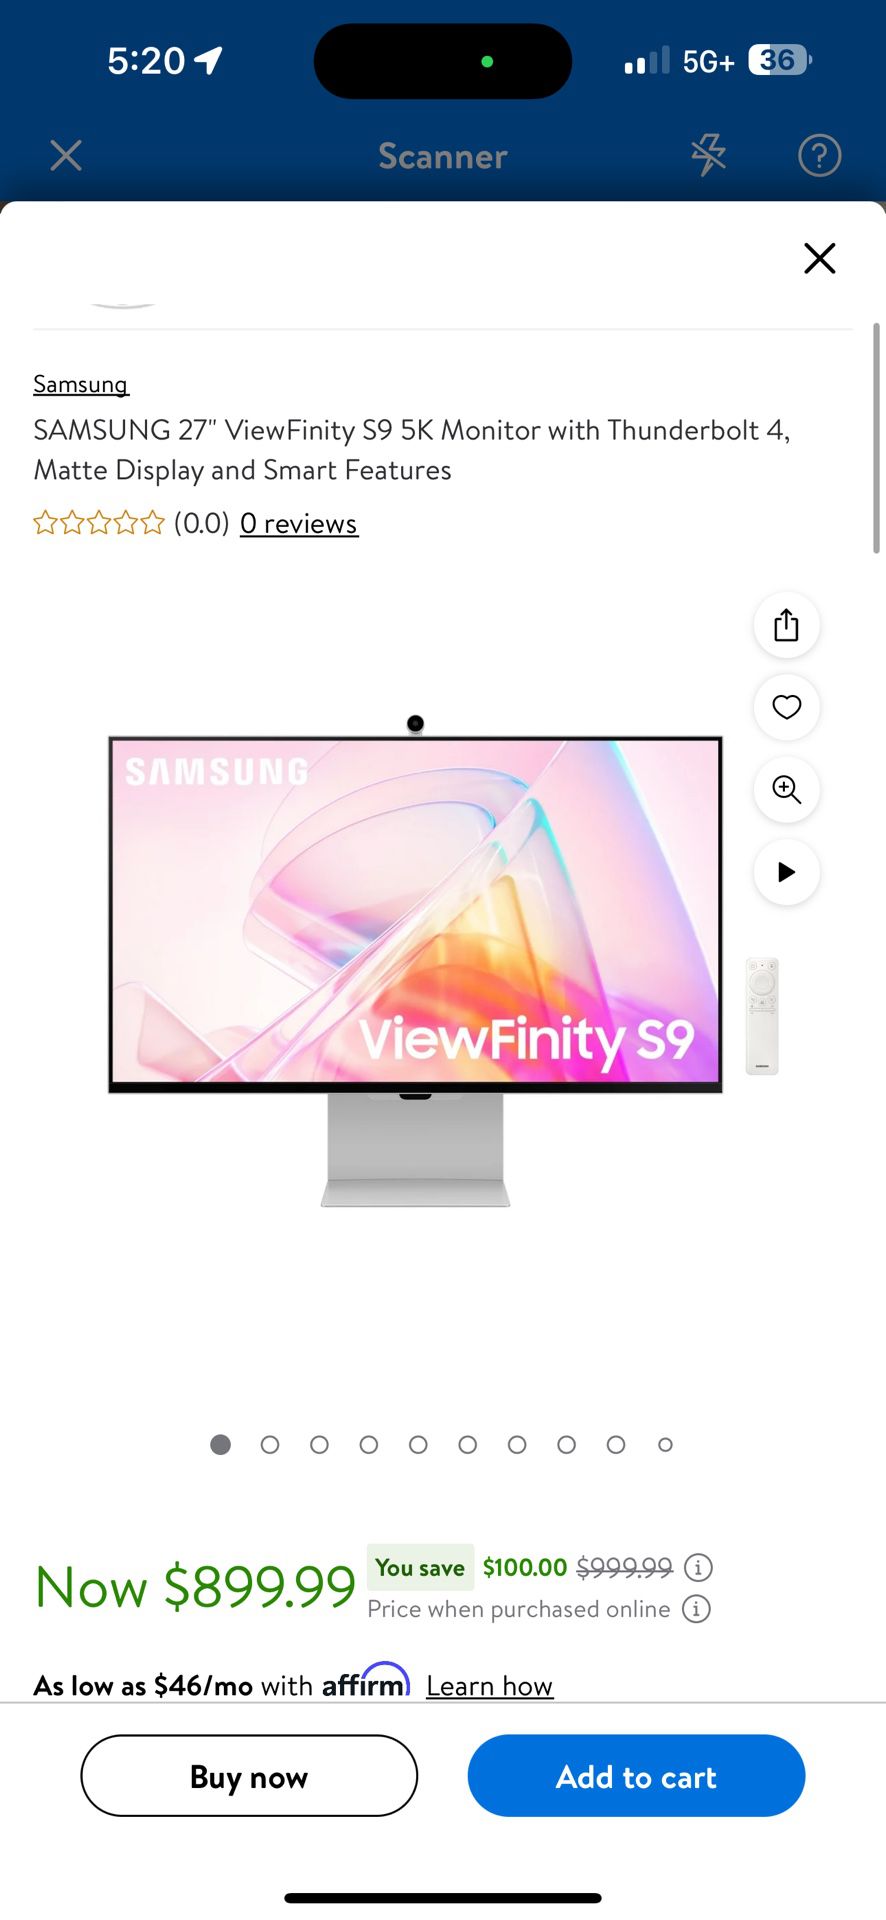 SAMSUNG 27" ViewFinity S9 5K Monitor with Thunderbolt 4, Matte Display and Smart Features